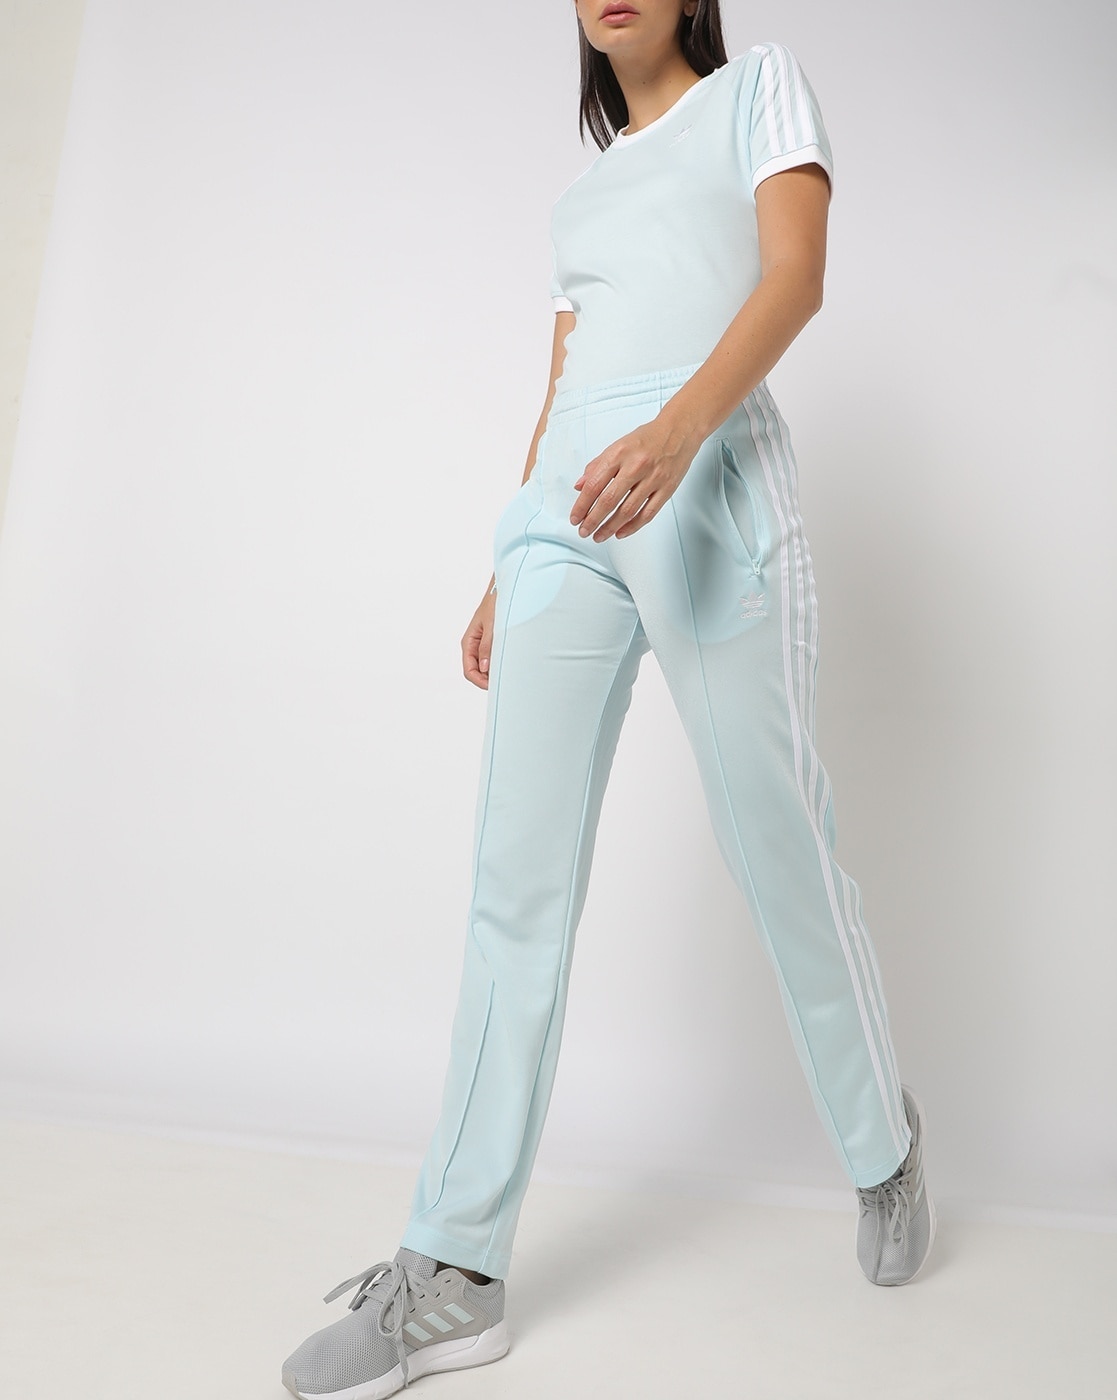 Latest Monte Carlo Joggers & Track Pants arrivals - Women - 9 products |  FASHIOLA INDIA